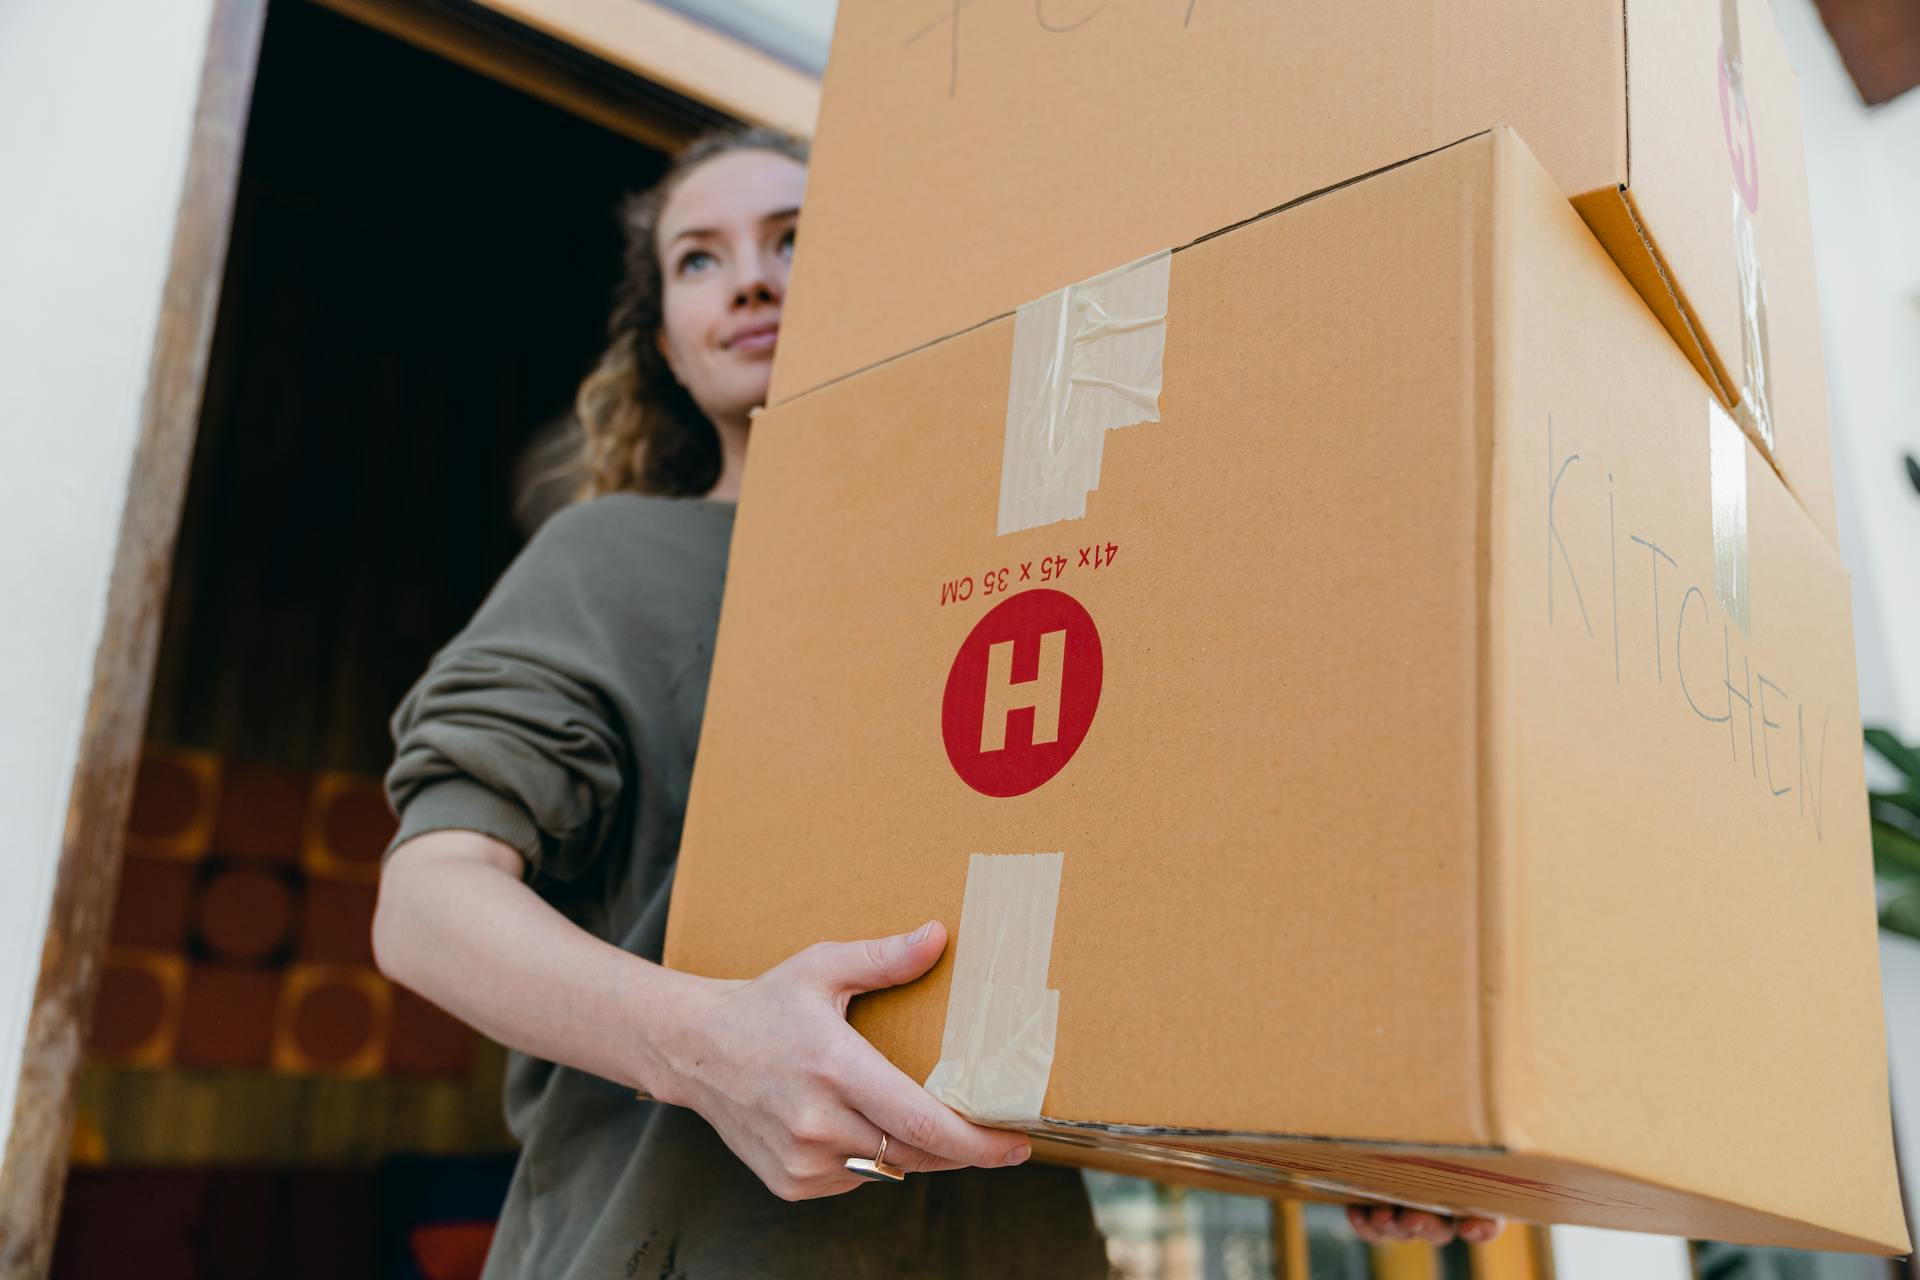 A young woman carrying carton boxes | Source: Pexels